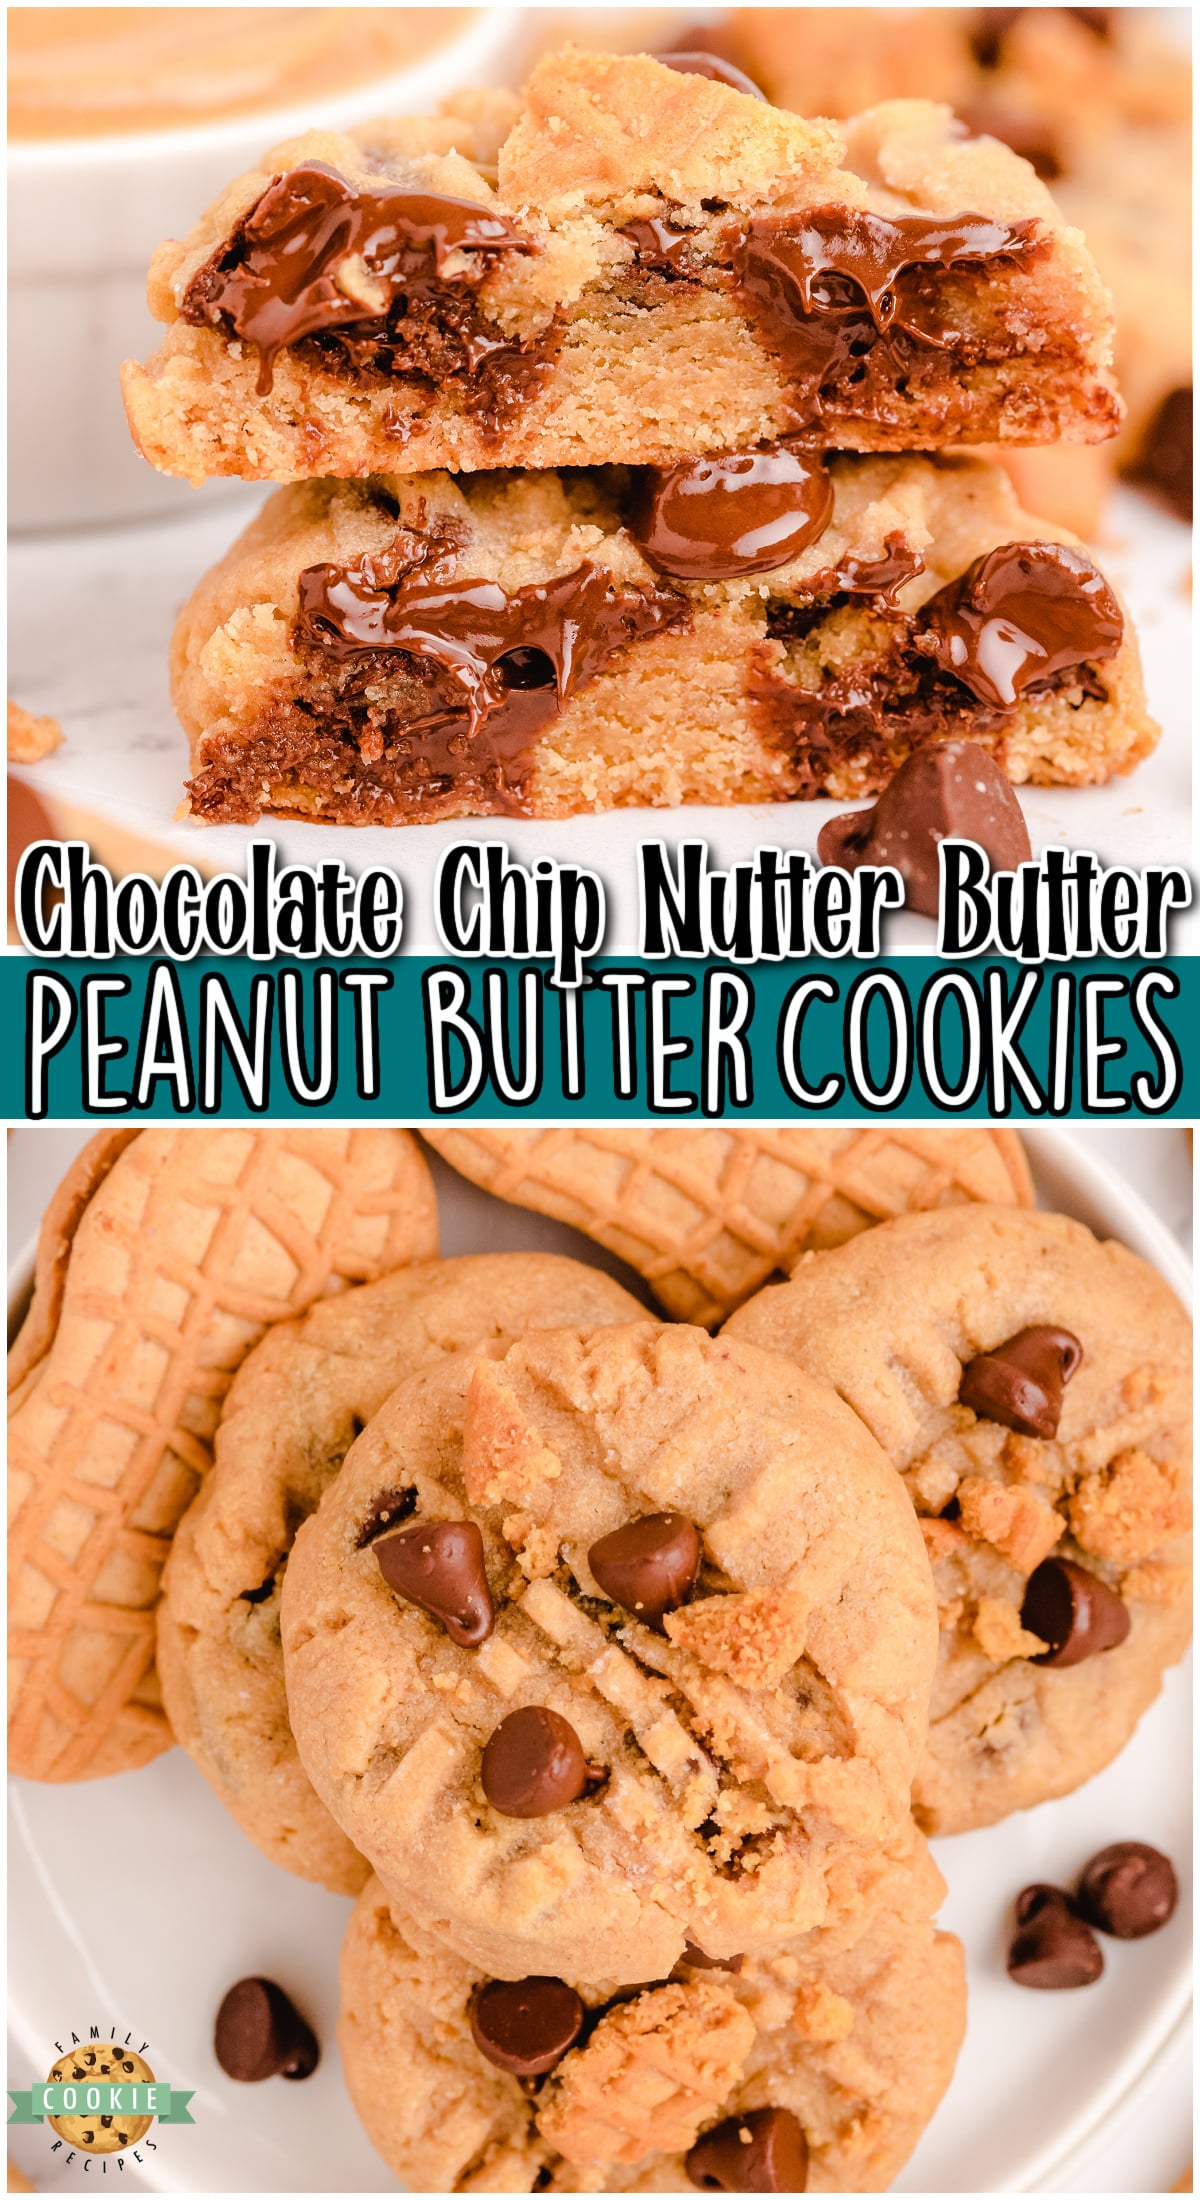 Nutter Butter Chocolate Chip Peanut Butter Cookies include the BEST combination: peanut butter + chocolate! Nutter Butter lovers unite with these peanut butter chocolate chip cookies you won't be able to get enough of.